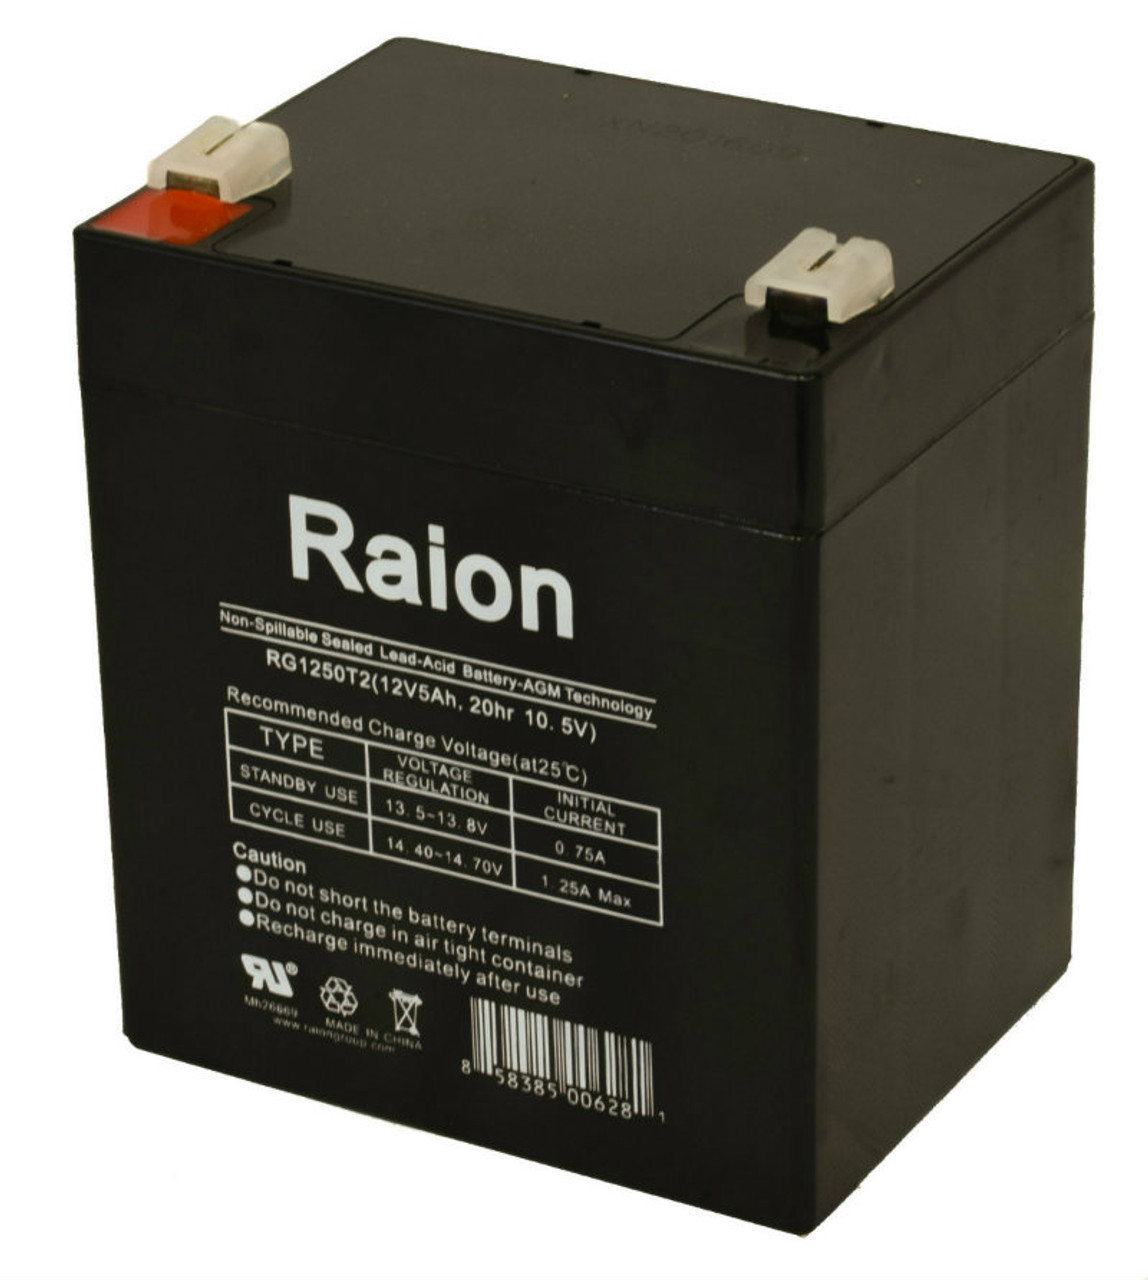 Raion Power RG1250T1 Replacement Alarm Security System Battery for Securitron DT7